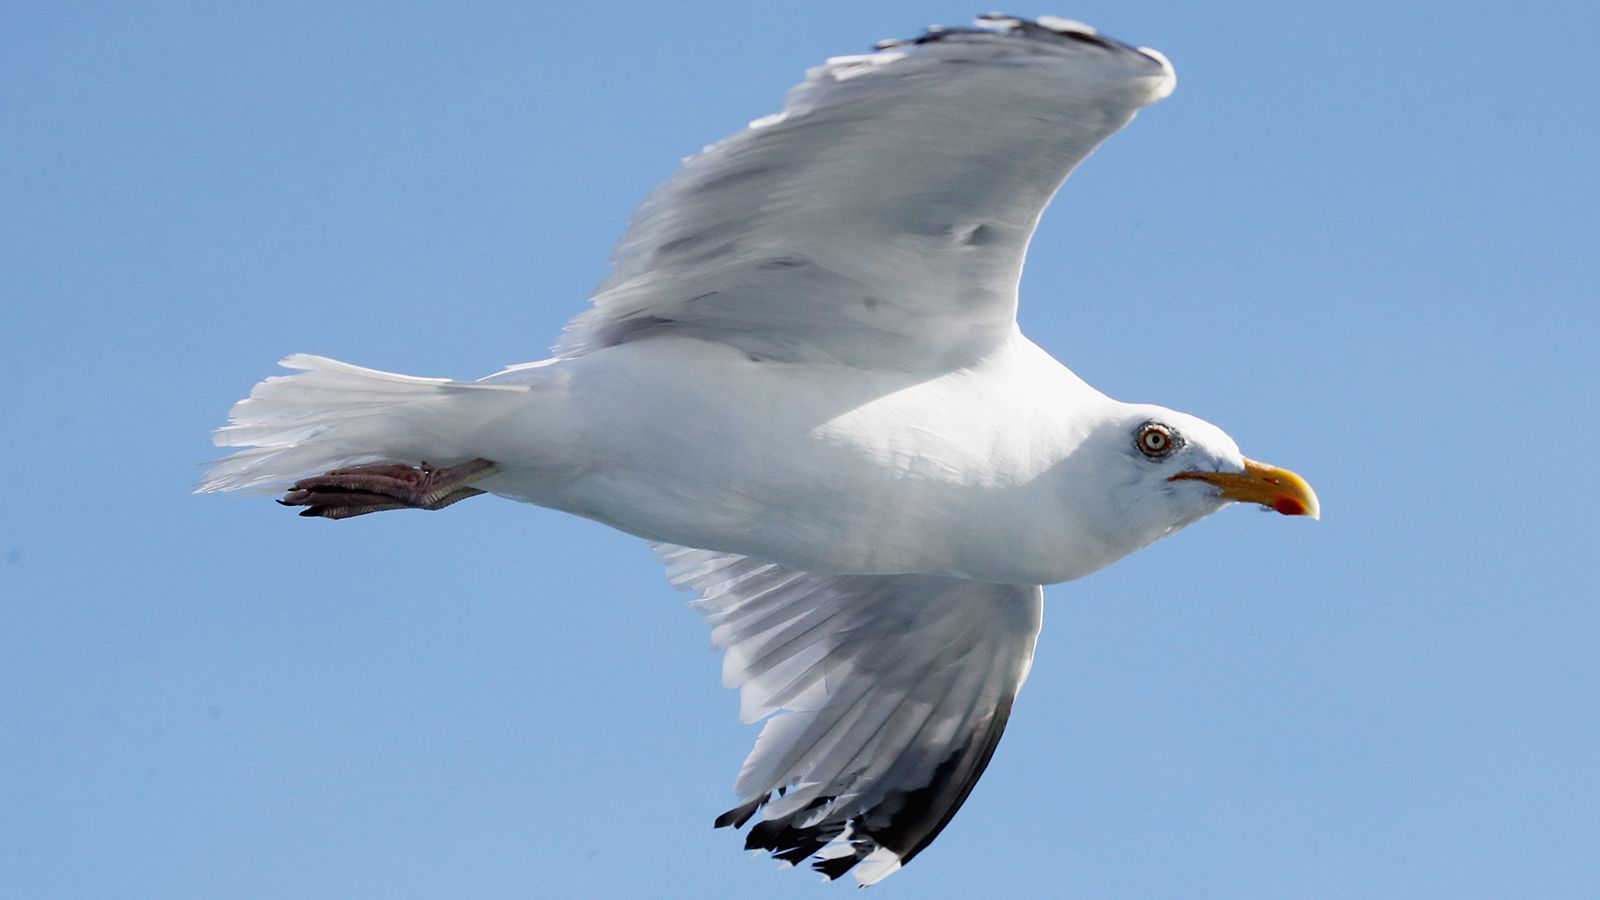 Seagull strikes teen in the face while on amusement park ride in New Jersey